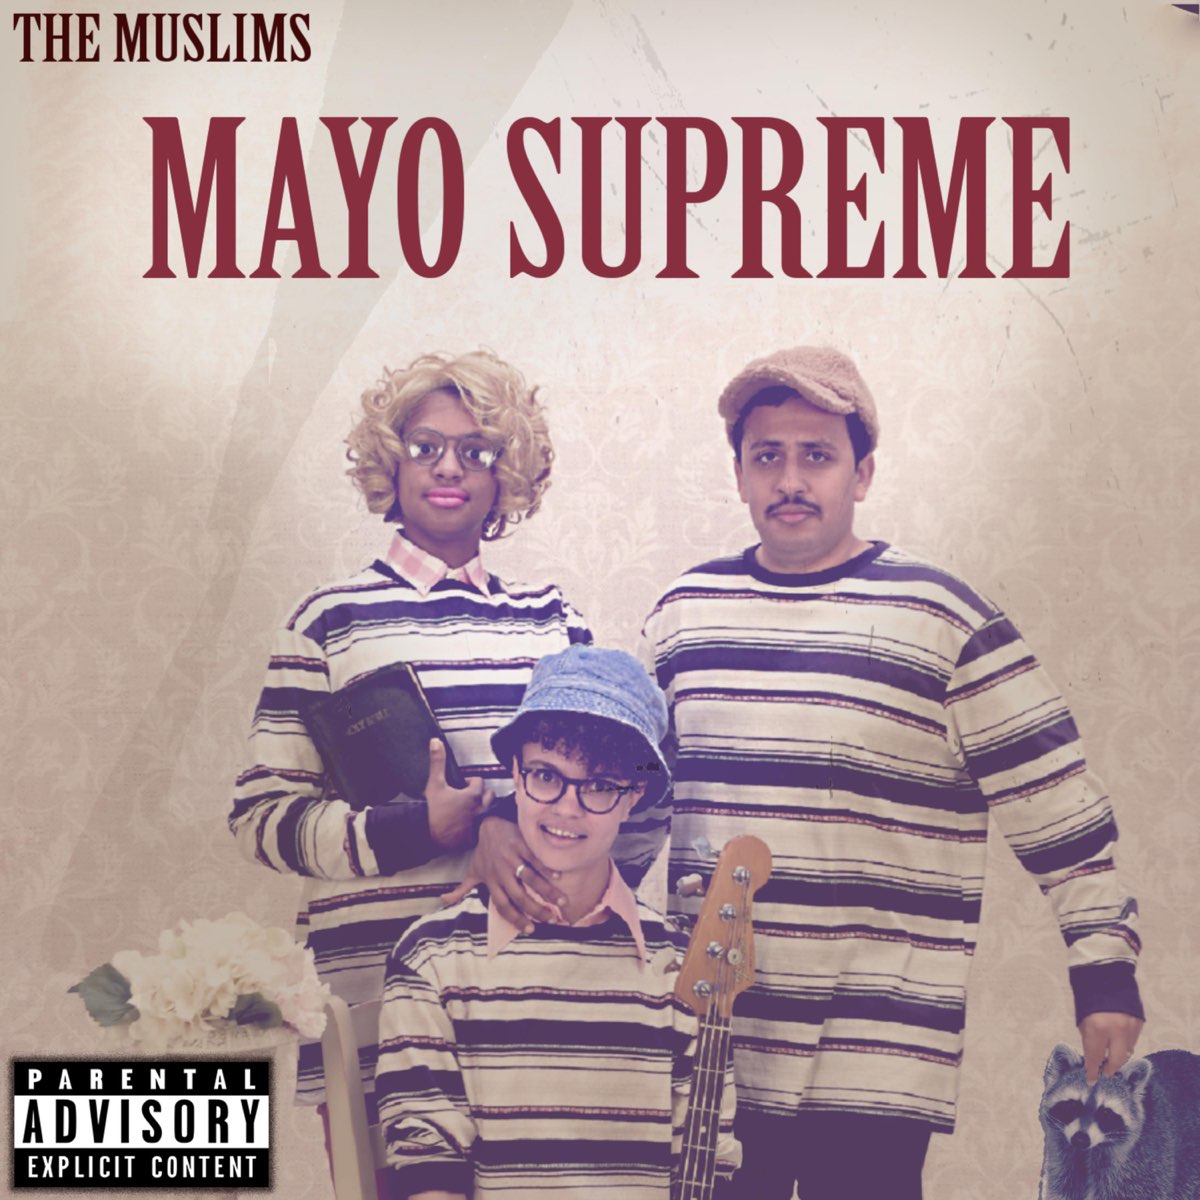 The Muslims MAYO SUPREME cover artwork